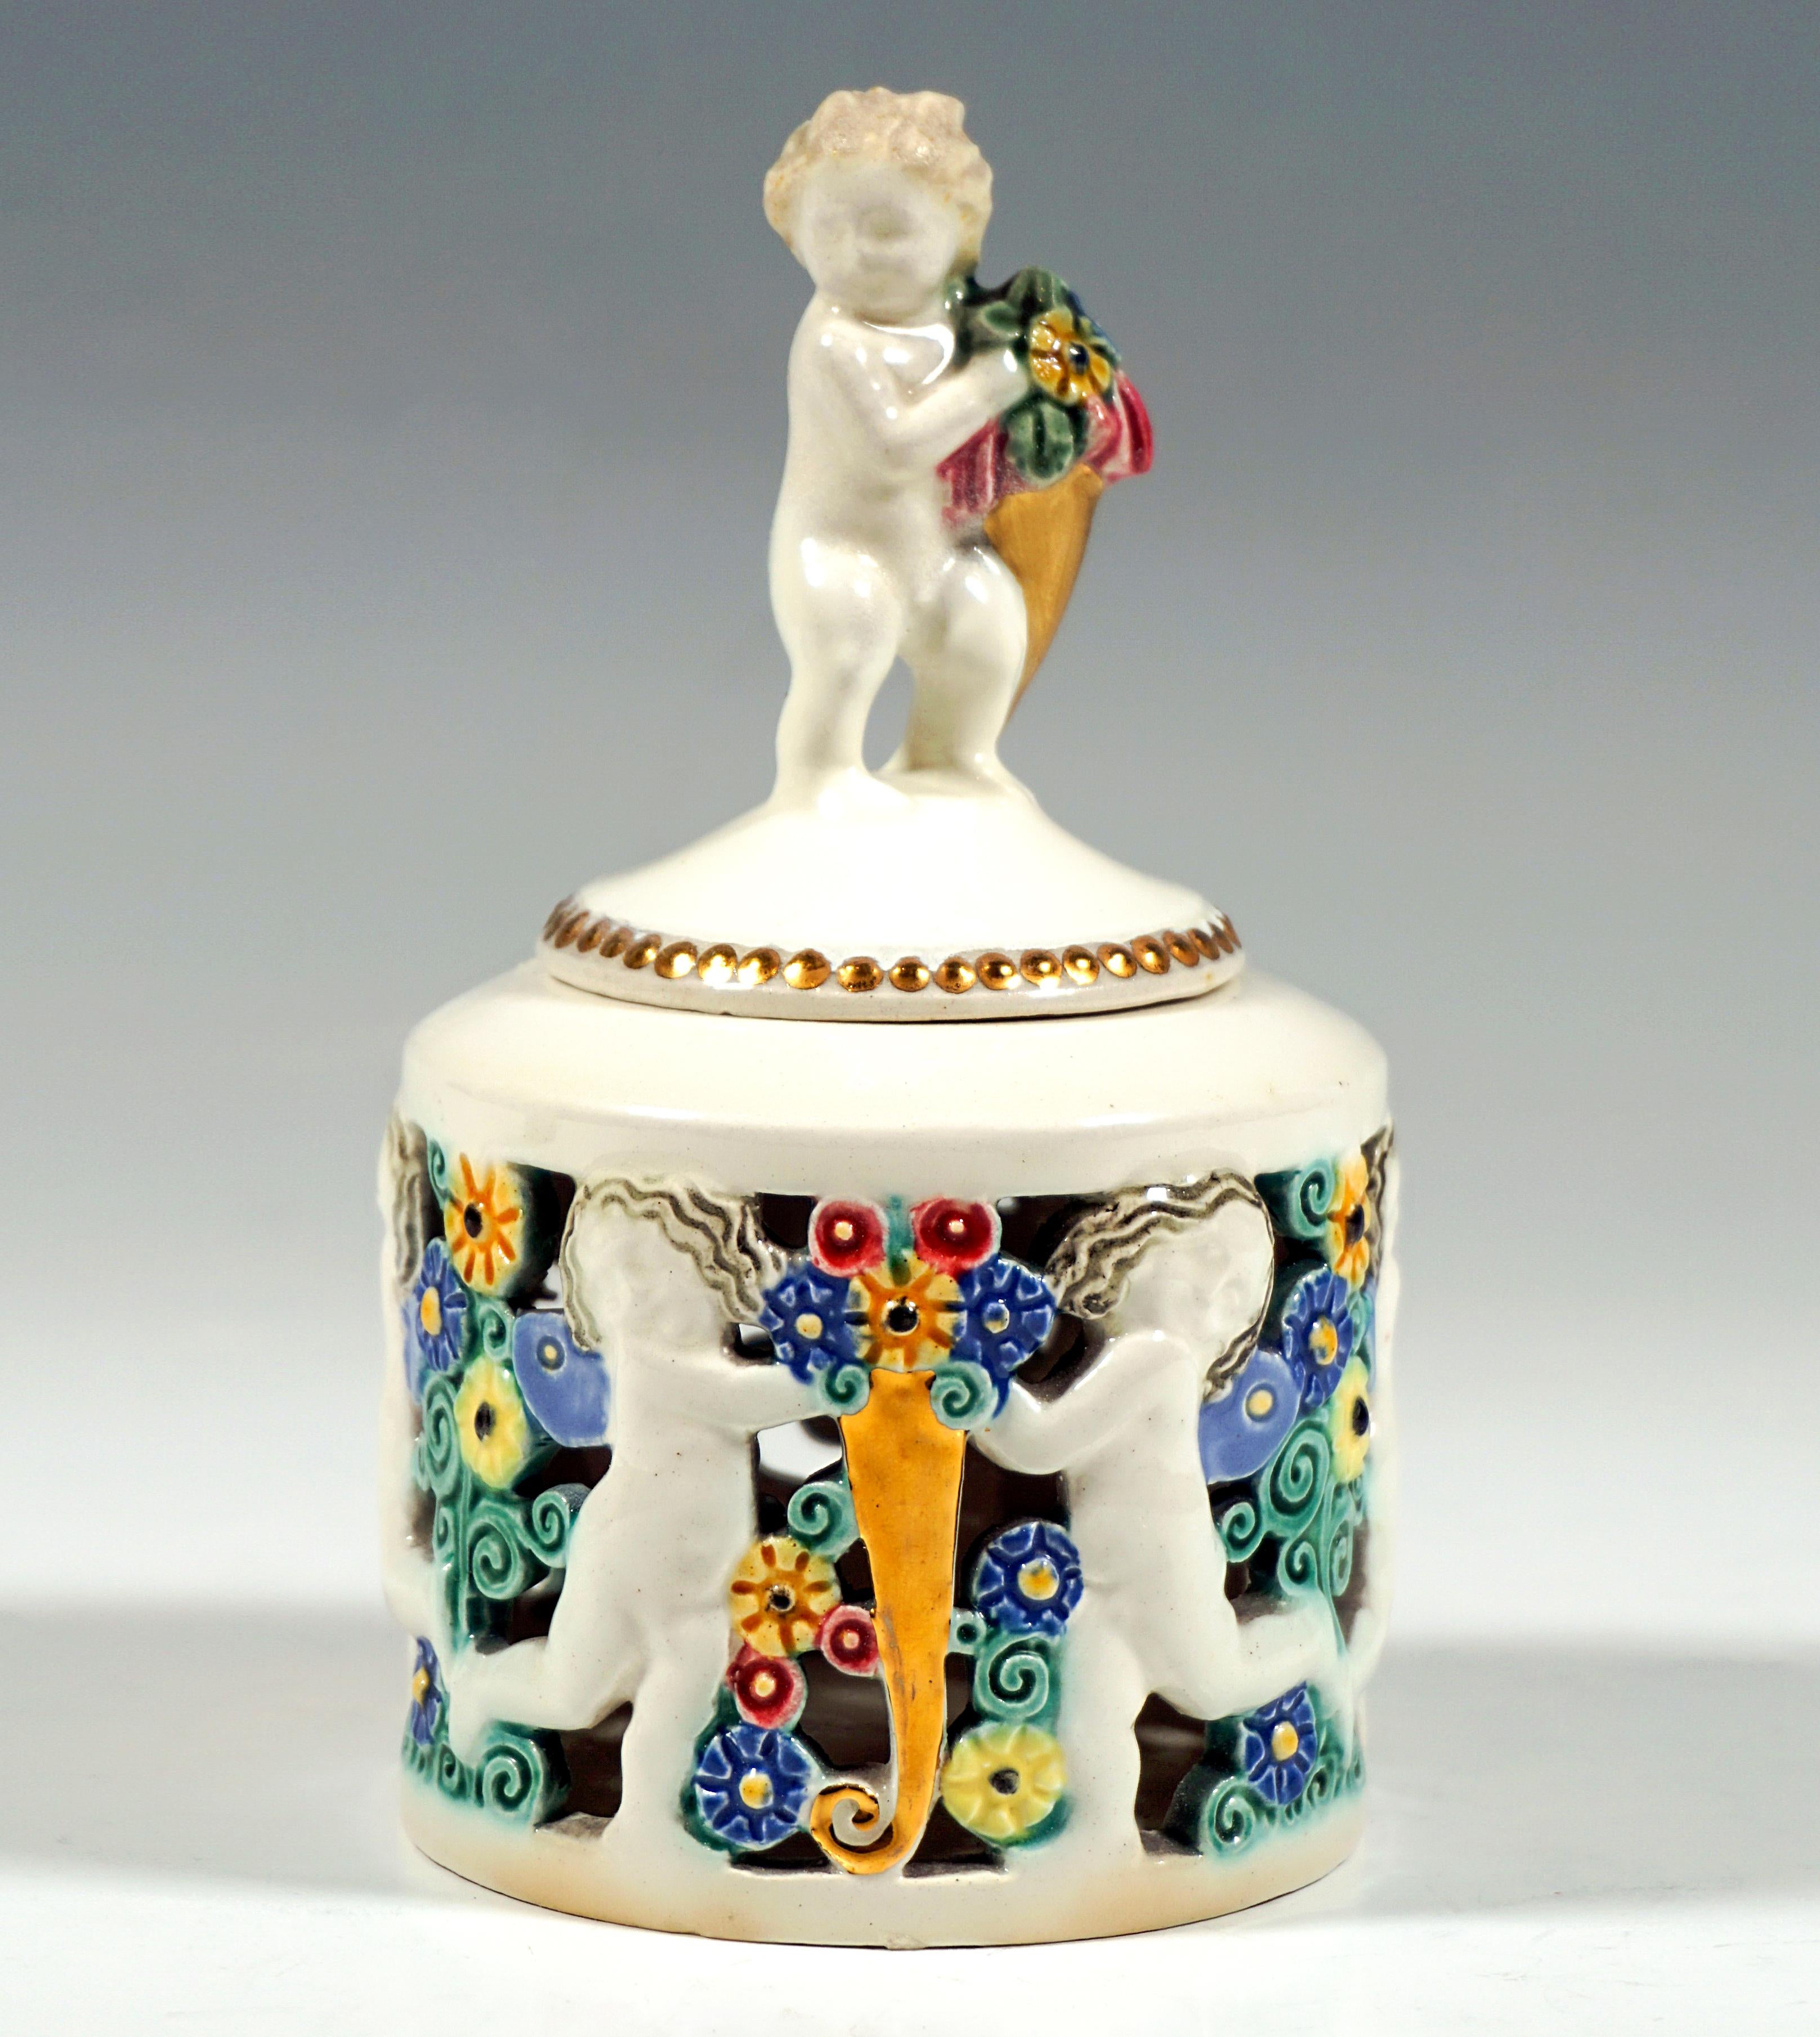 Delicate Art Nouveau ceramic piece:
Cylindrical vessel with an openwork relief of running putti, in between colourfully glazed flower bouquets and golden cornucopias with blossoms, the slightly domed, round lid decorated with a golden pearl string